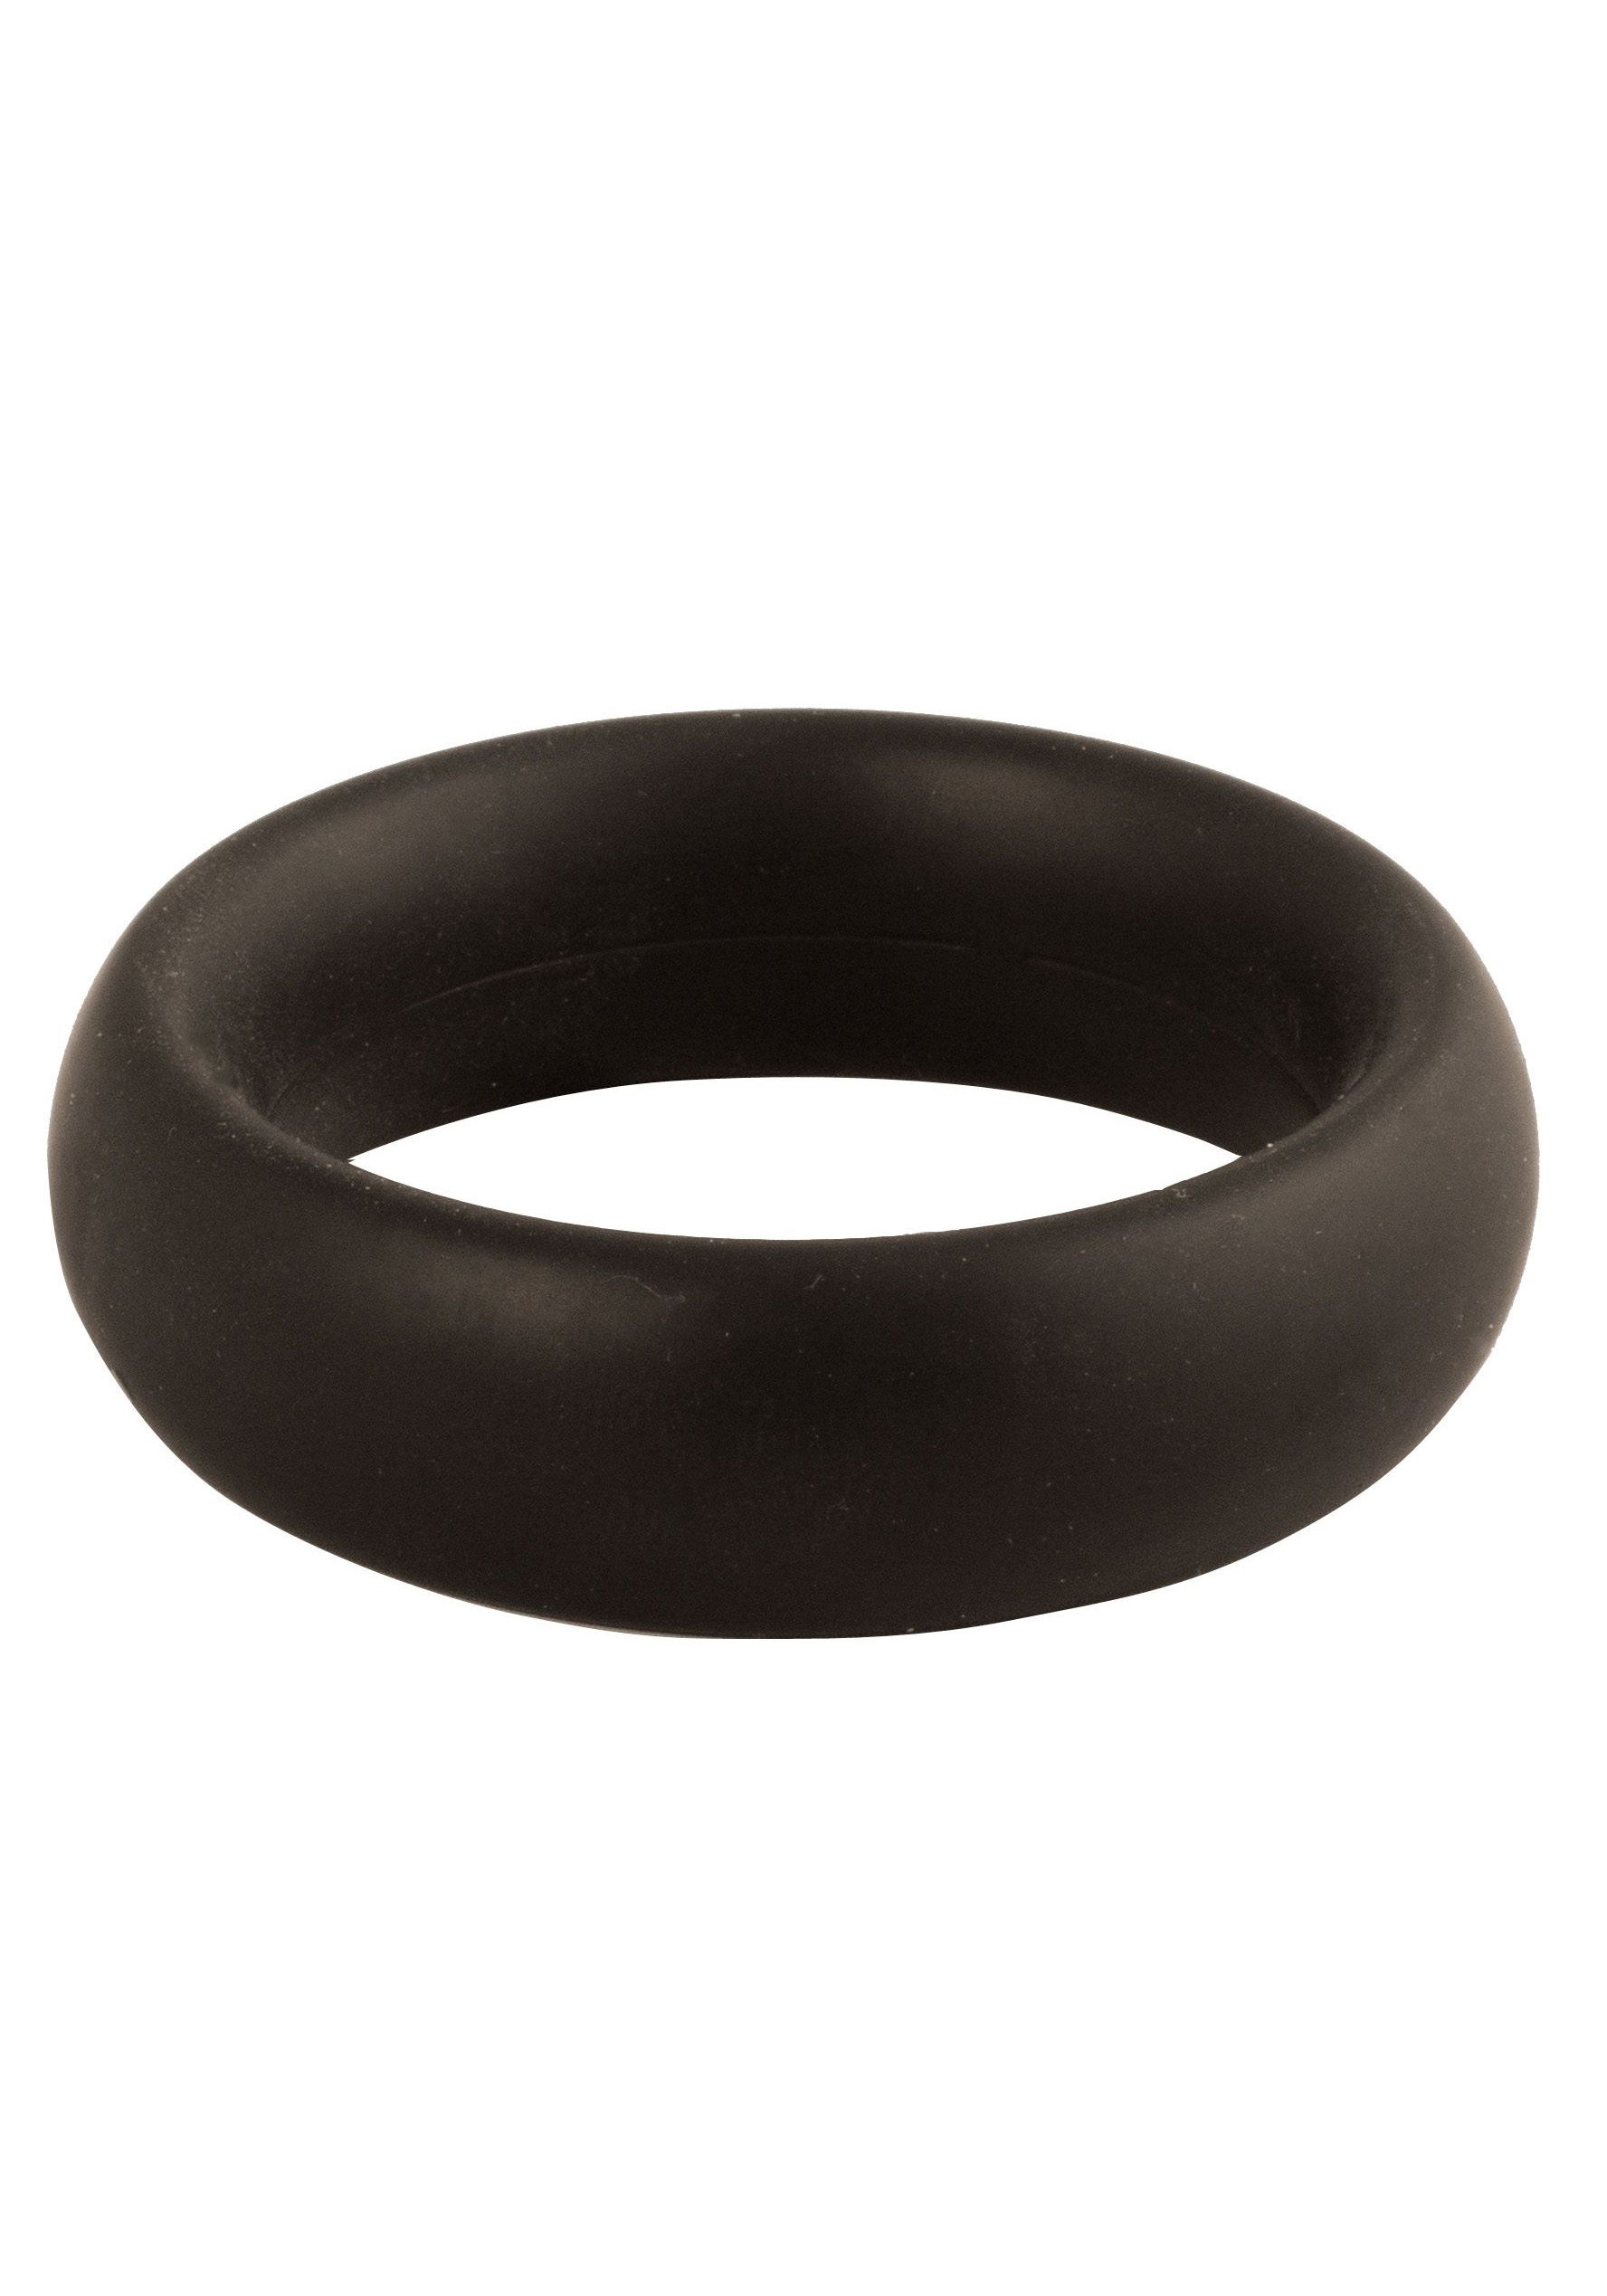 Mr. B: Silicone Donut Cockring